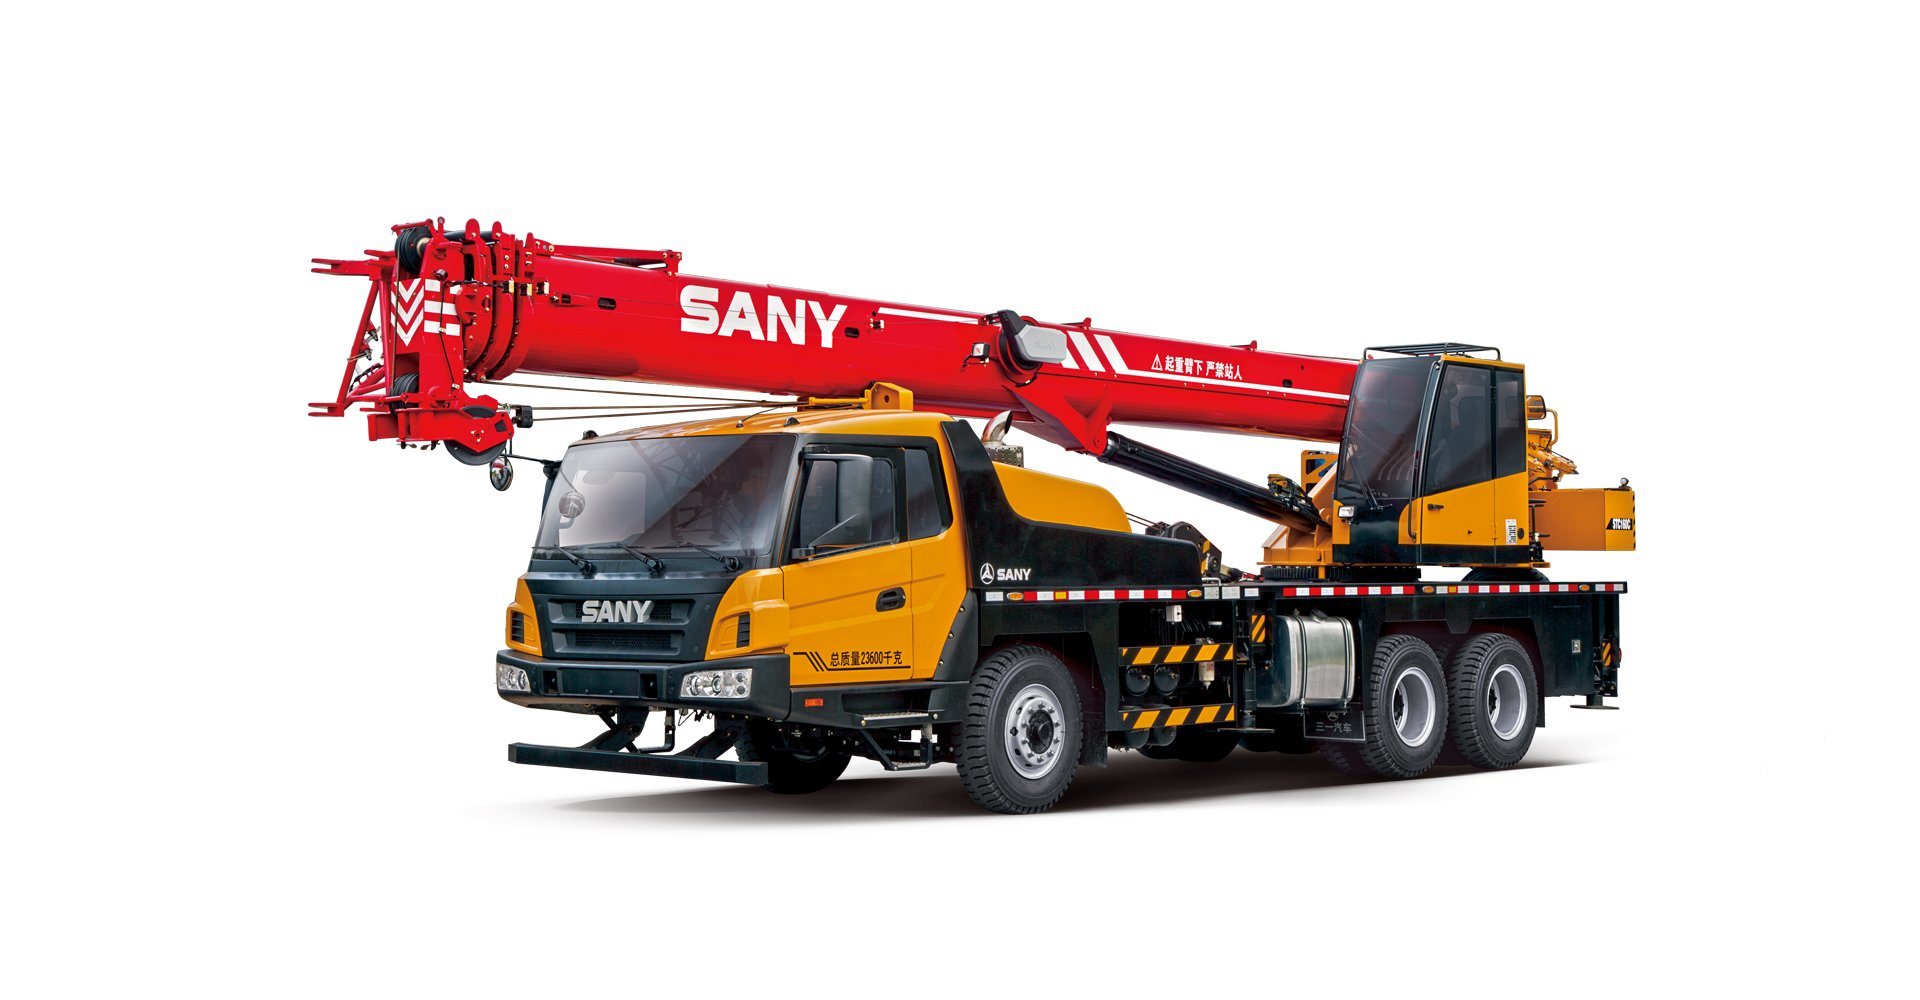 Stc900t Brand New 90tons Truck Cranes for Sale